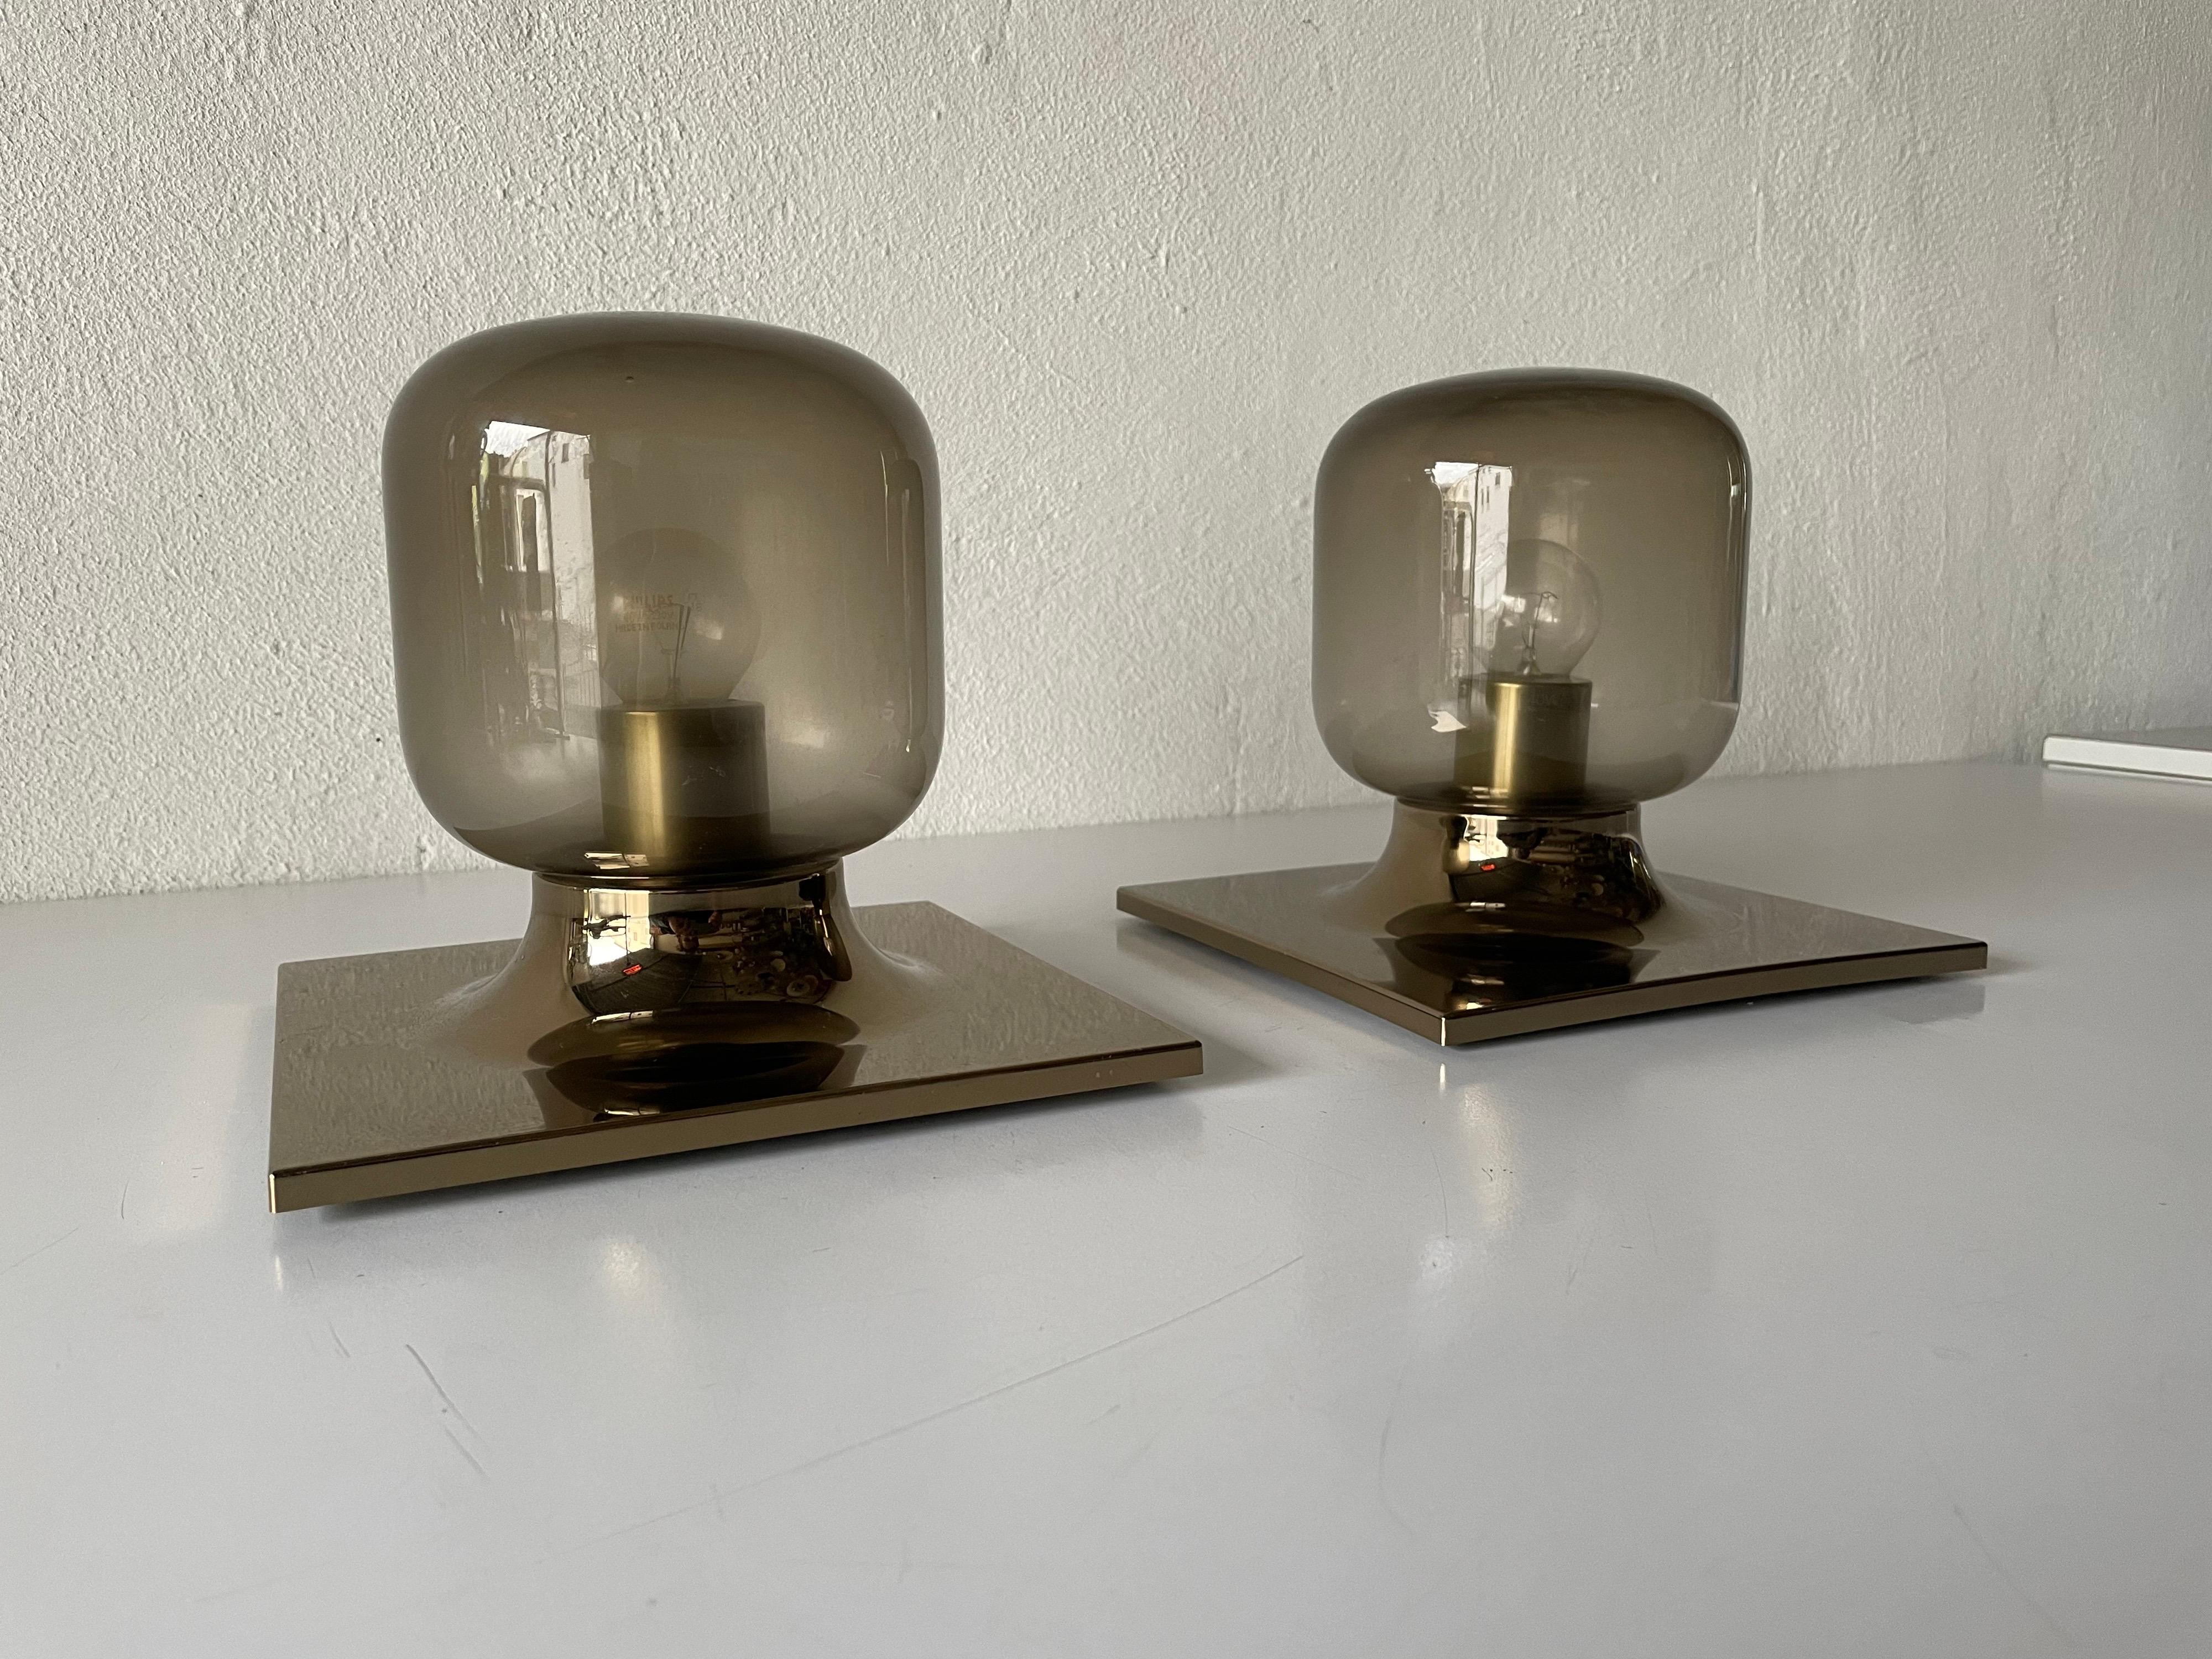 Smoked glass and gold metal pair of wall or ceiling lamps by Motoko Ishii for Staff, 1960s, Germany
Very elegant and Minimalist sconces

Lamps are in very good condition.

These lamps works with E14 standard light bulbs. 
Wired and suitable to